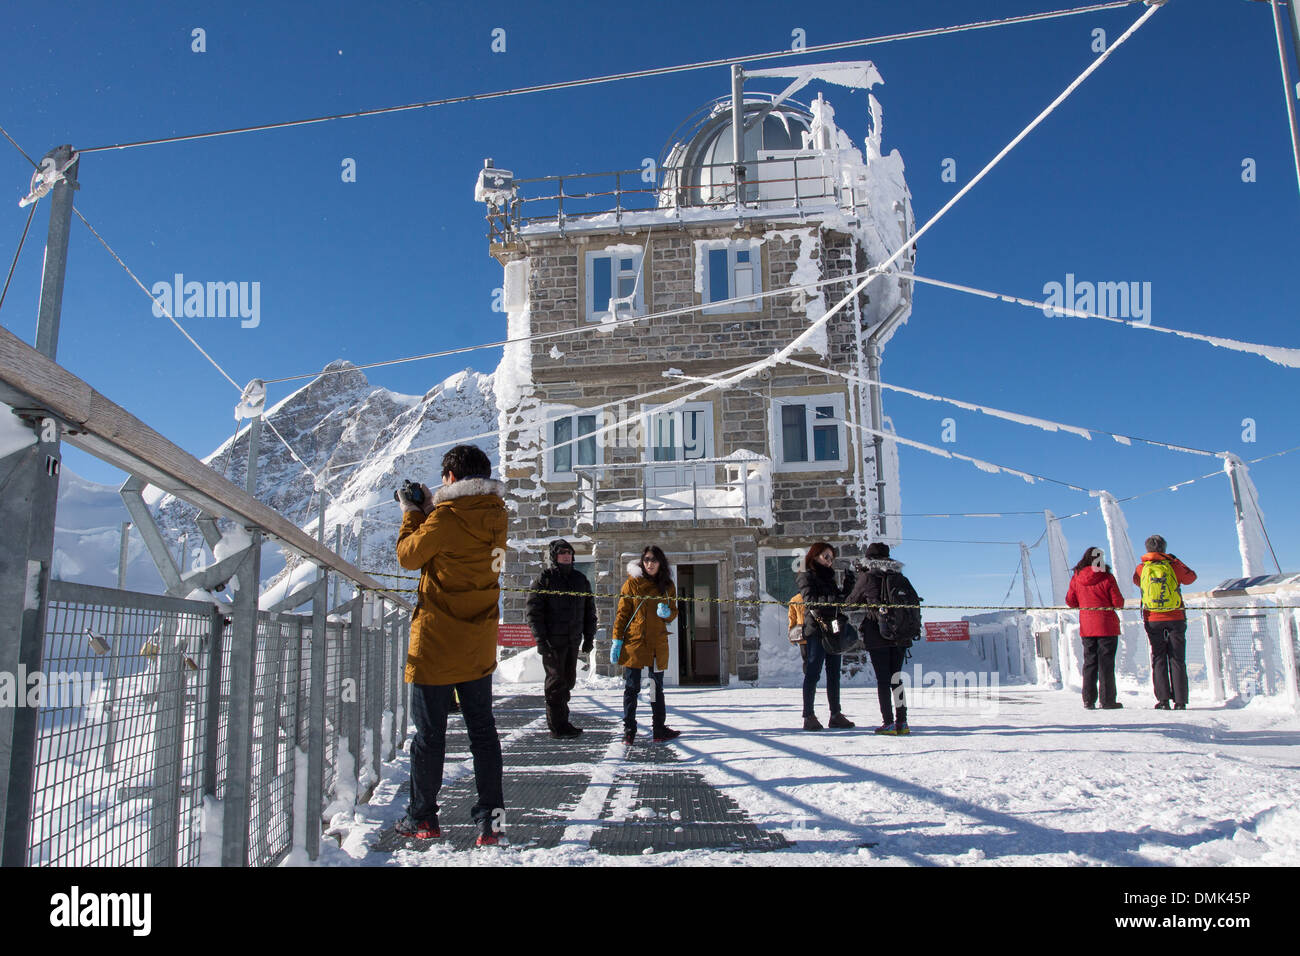 TOURISTS LOOKING AT THE LANDSCAPE FROM THE OBSERVATORY NICKNAMED THE SPHINX AT THE SUMMIT OF THE JUNGFRAUJOCH PASS, BERNESE ALPS, CANTON OF BERN, SWITZERLAND Stock Photo